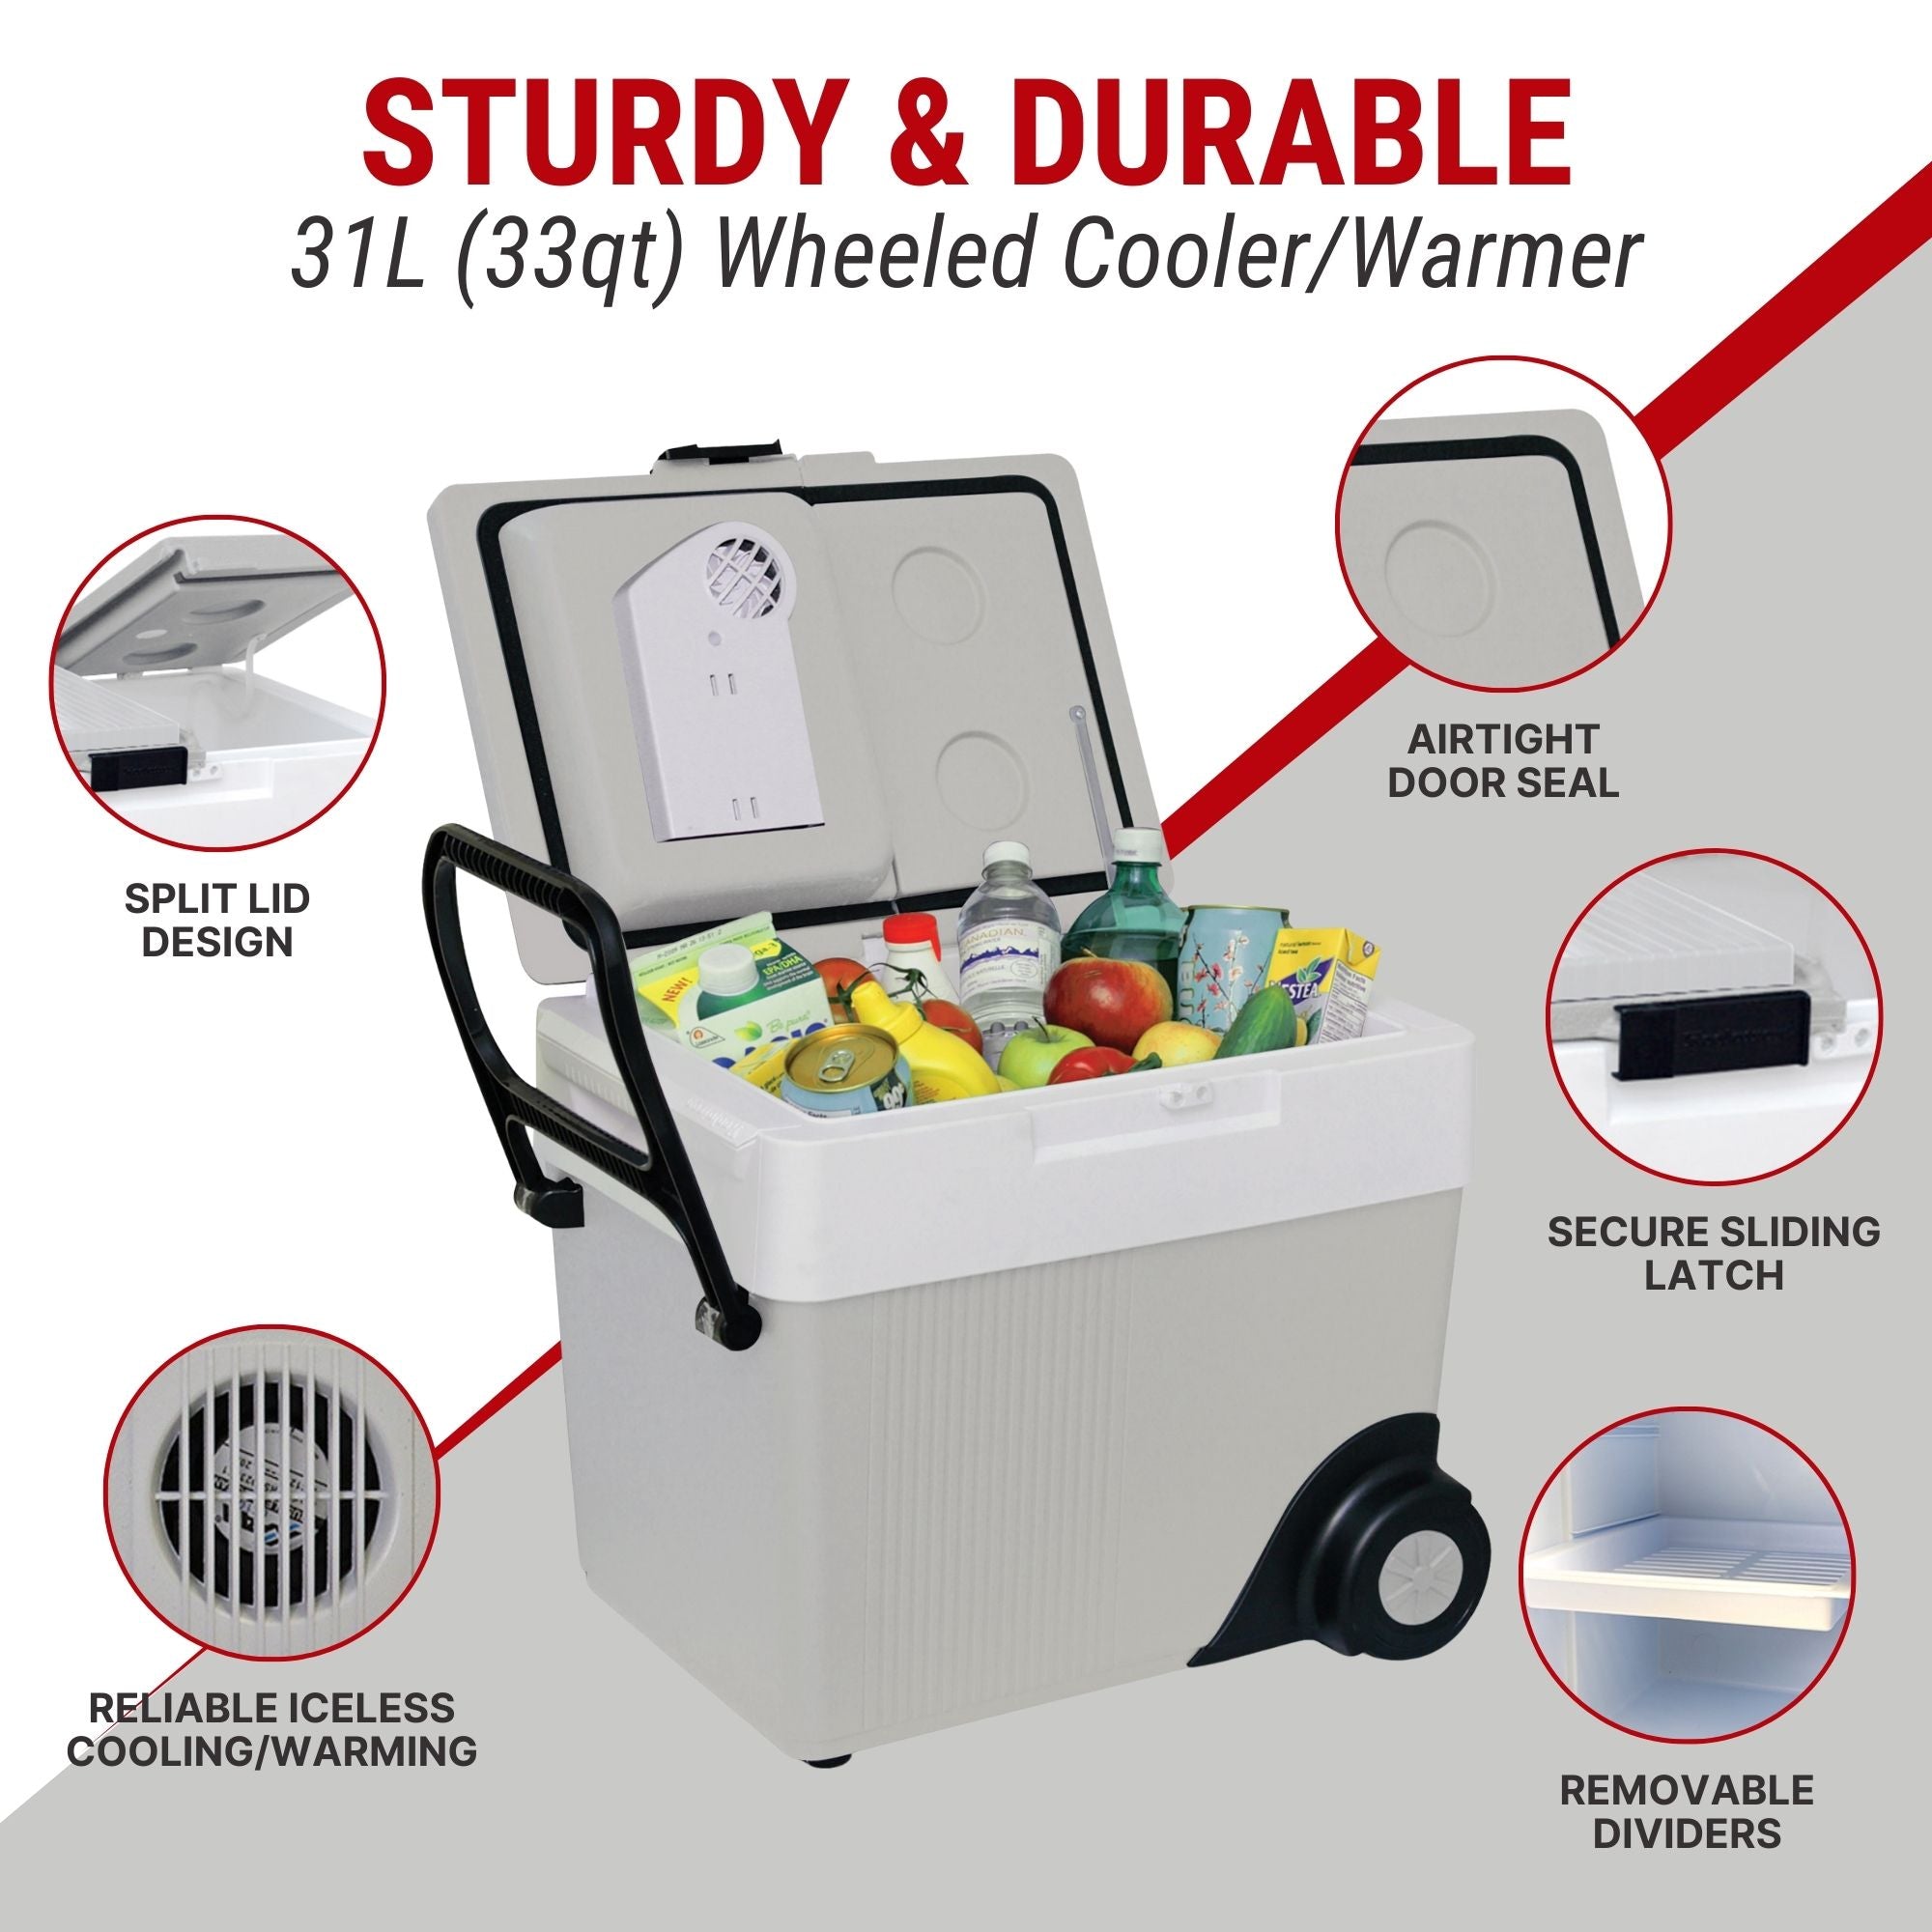 Koolatron 12V cooler/warmer open with food inside surrounded by closeup images of features, labeled: Reliable iceless cooling/warming; split lid design; airtight door seal; secure sliding latch; removable dividers. Text above reads, "STURDY AND DURABLE 31L (33 qt) wheeled cooler/warmer"